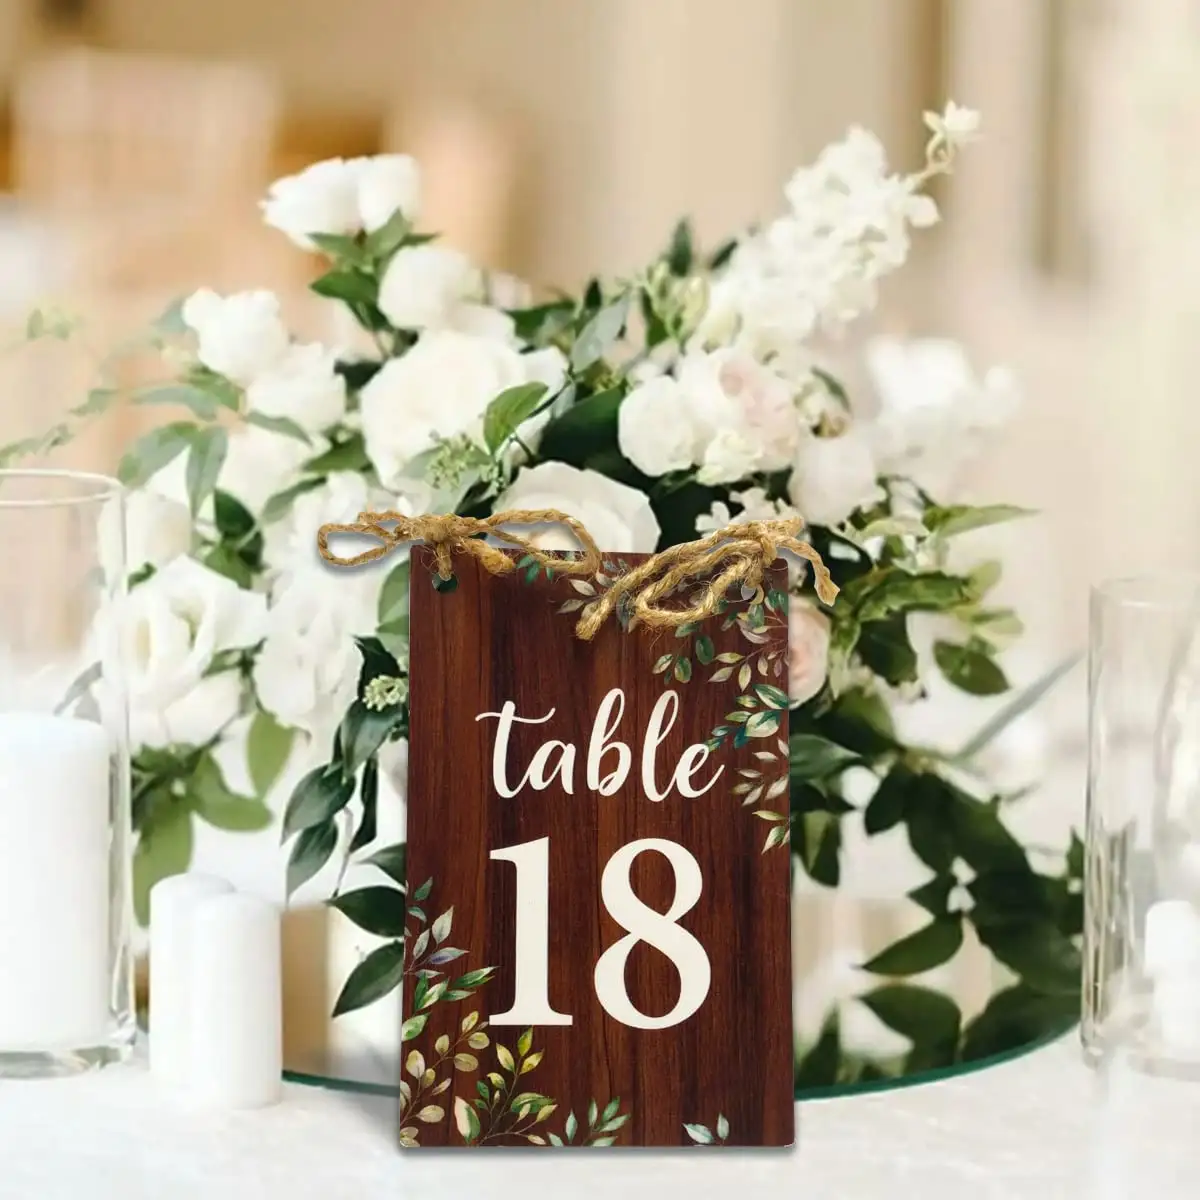 wooden table numberes Wedding Centerpieces for Tables natural wooden place card holders for Reception Decor